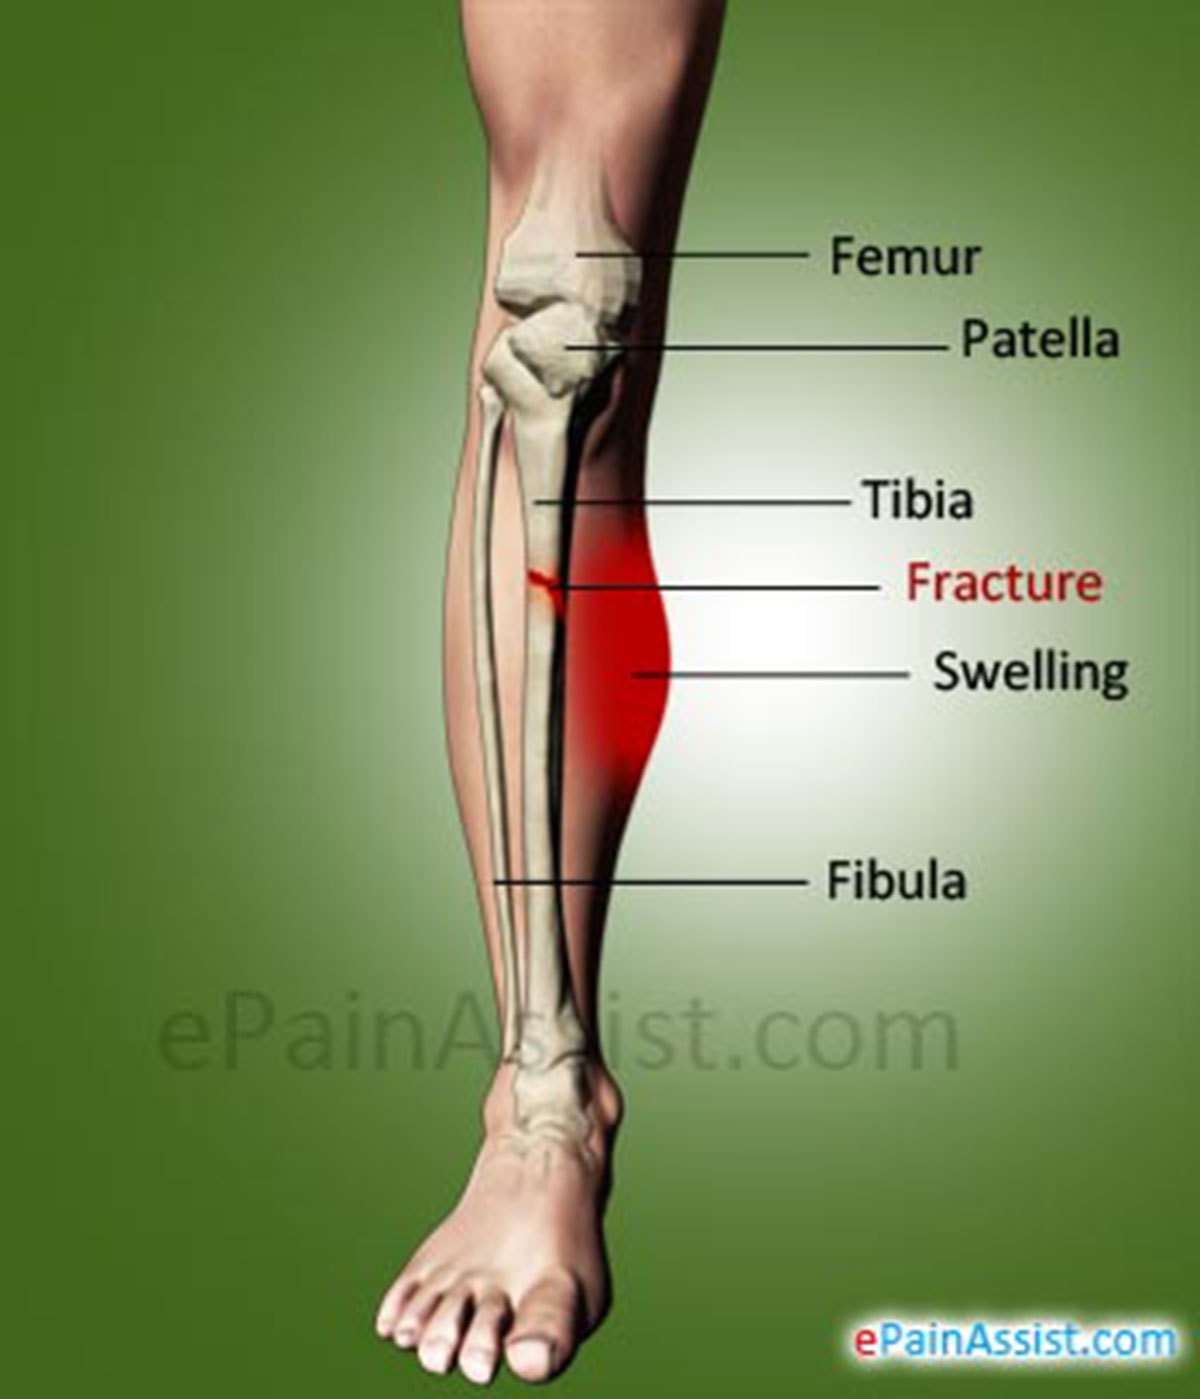 Shin Fracture or Fracture of TibiaCauses, Symptoms, Types